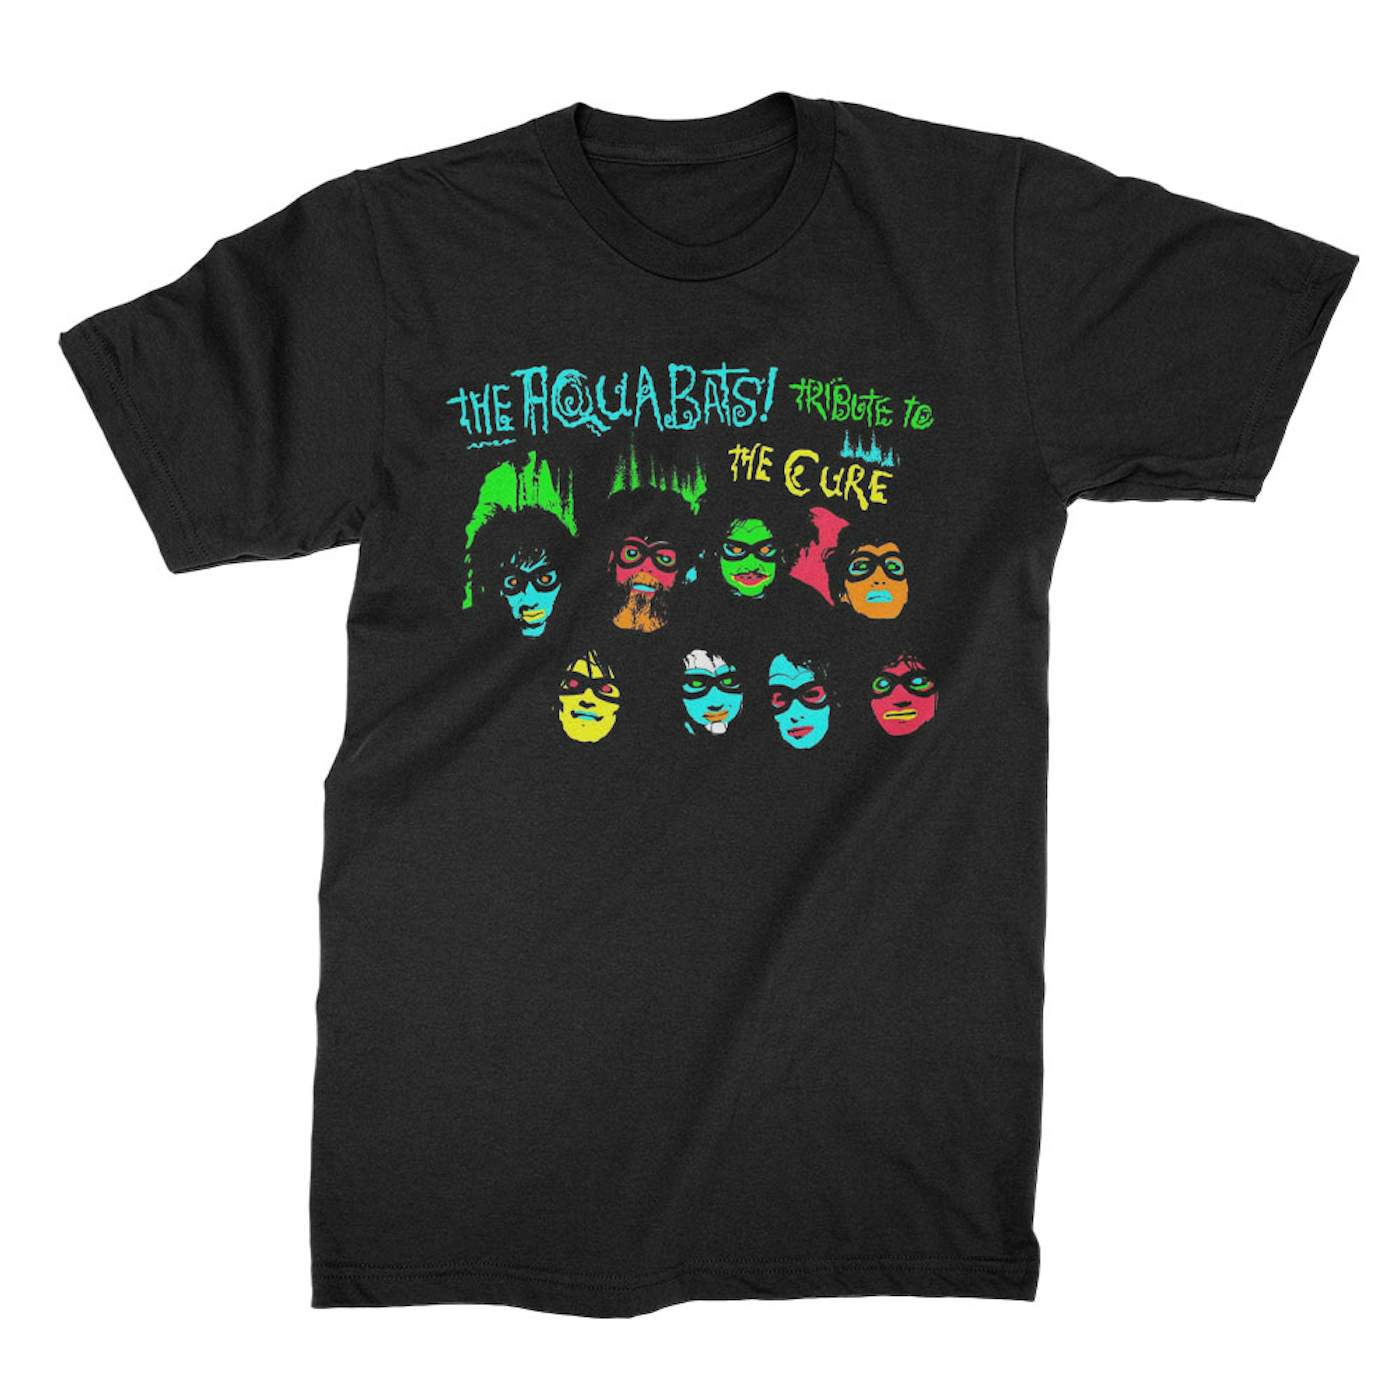 The Aquabats! Tribute To The Cure Tee (Black)